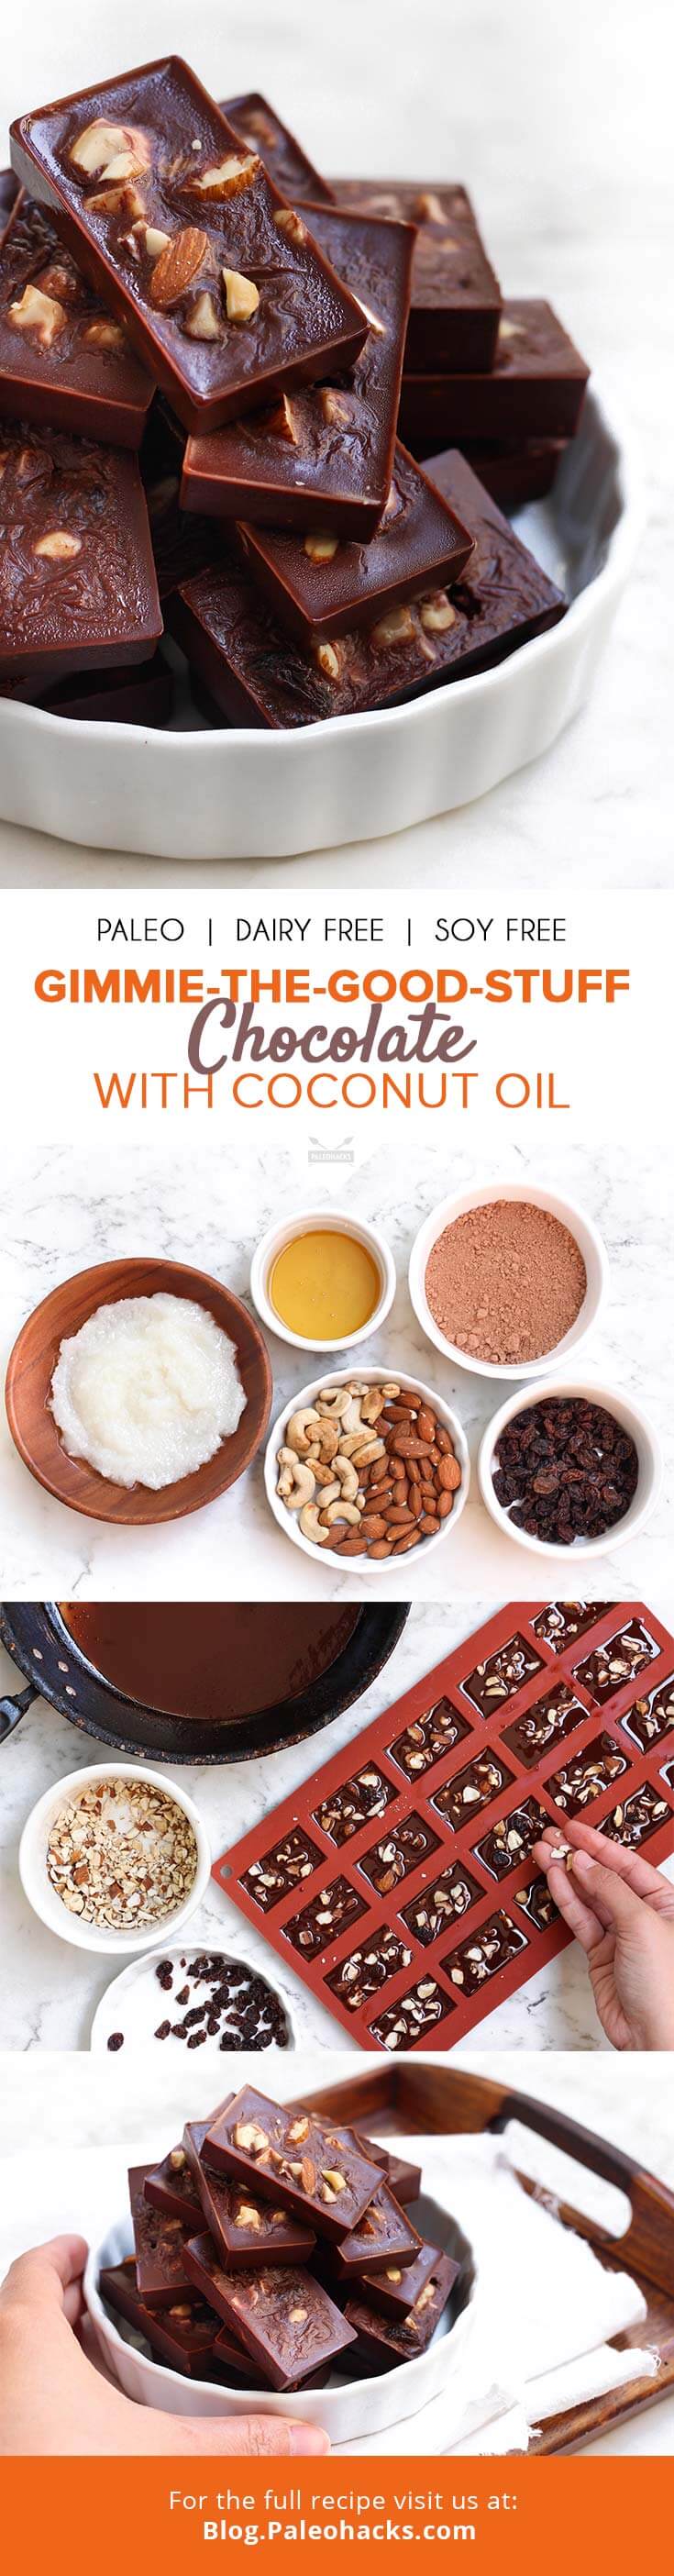 gimmie-the-good-stuff chocolate with coconut oil pin